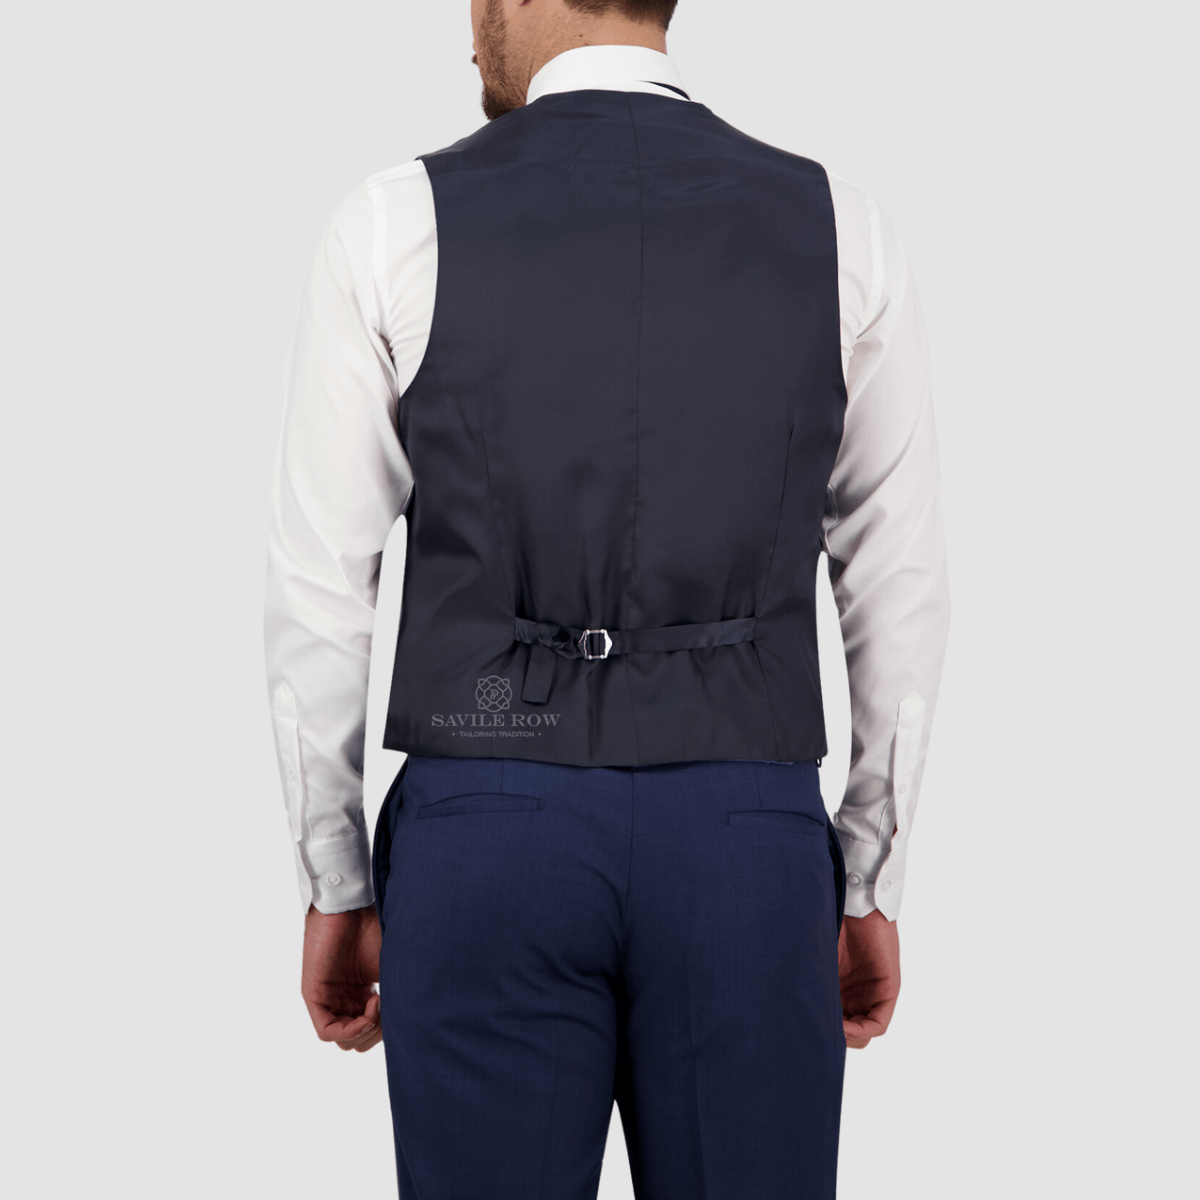 Mens Vests | Savile Row Tailored Fit Mens Isaac Vest in Navy Blue D3 ...